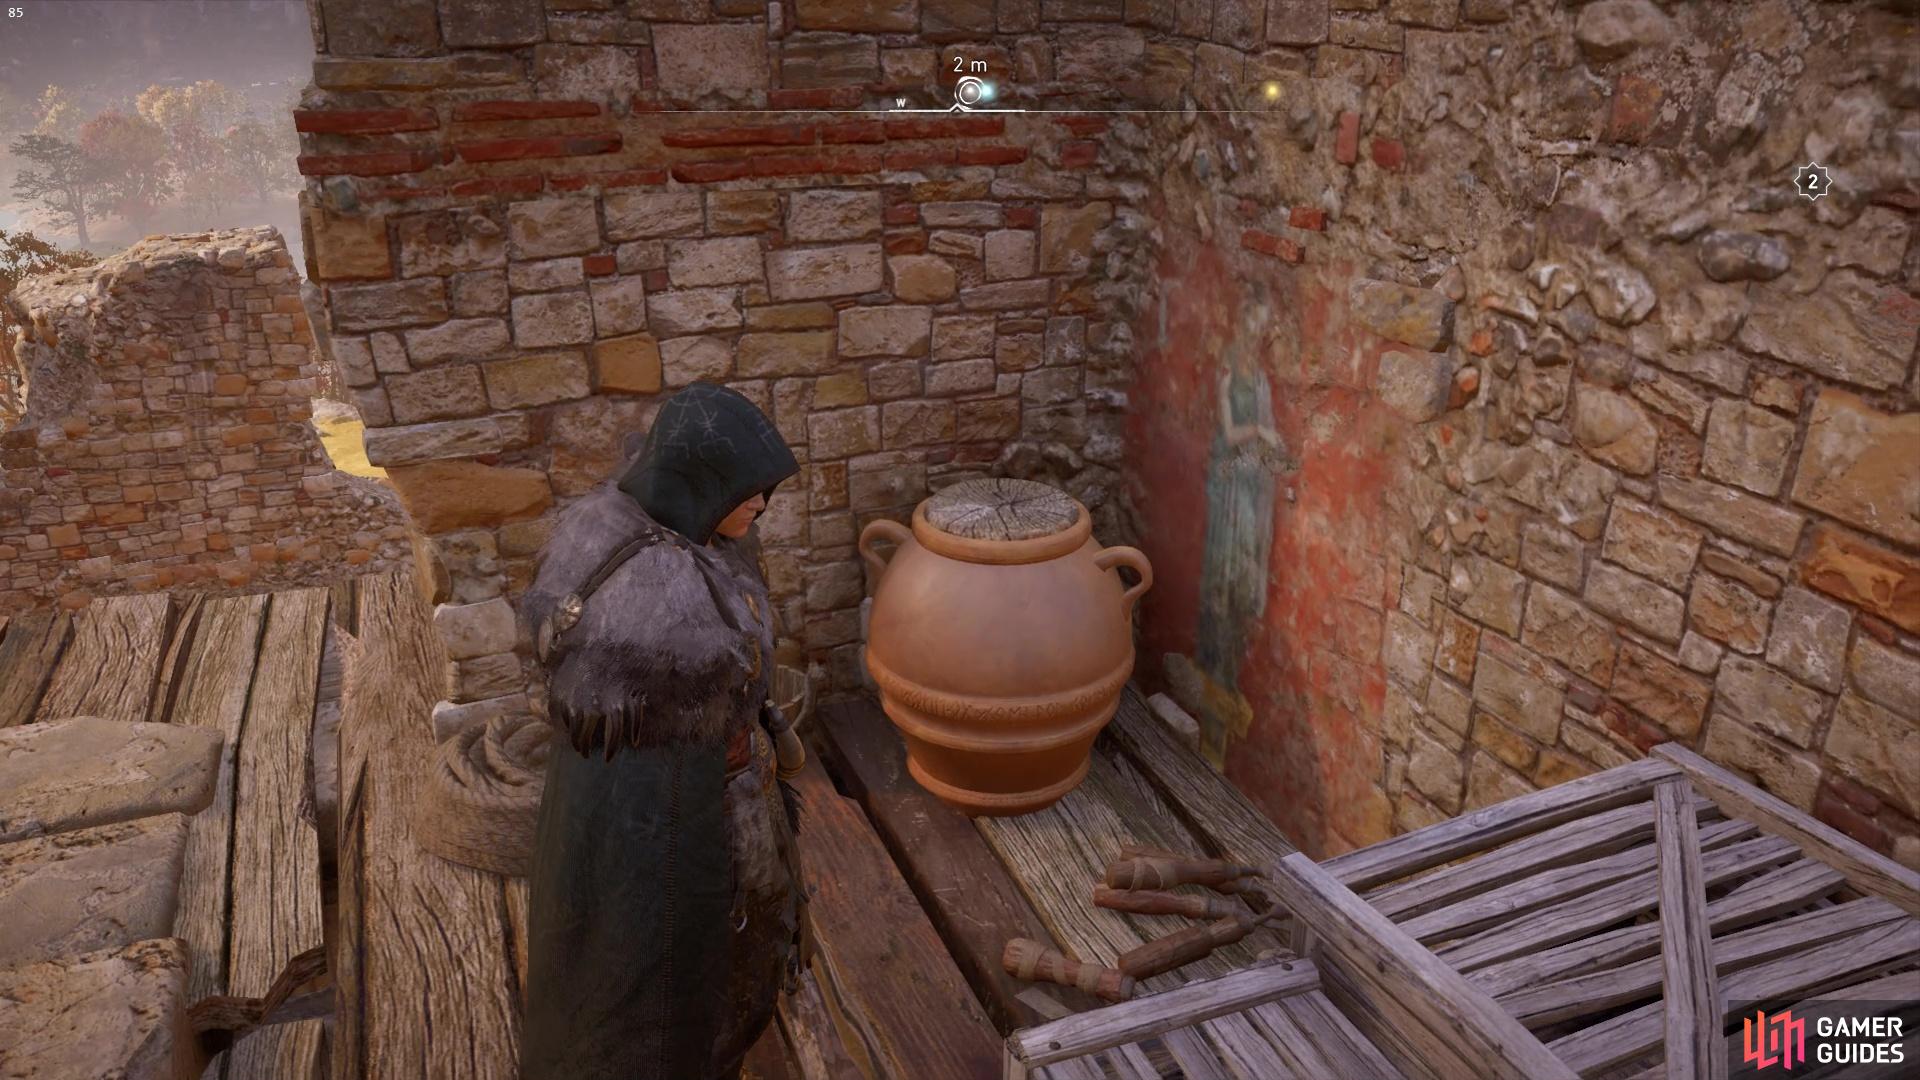 and if you break the pot on the platform you'll be able to collect a Roman Artifact.